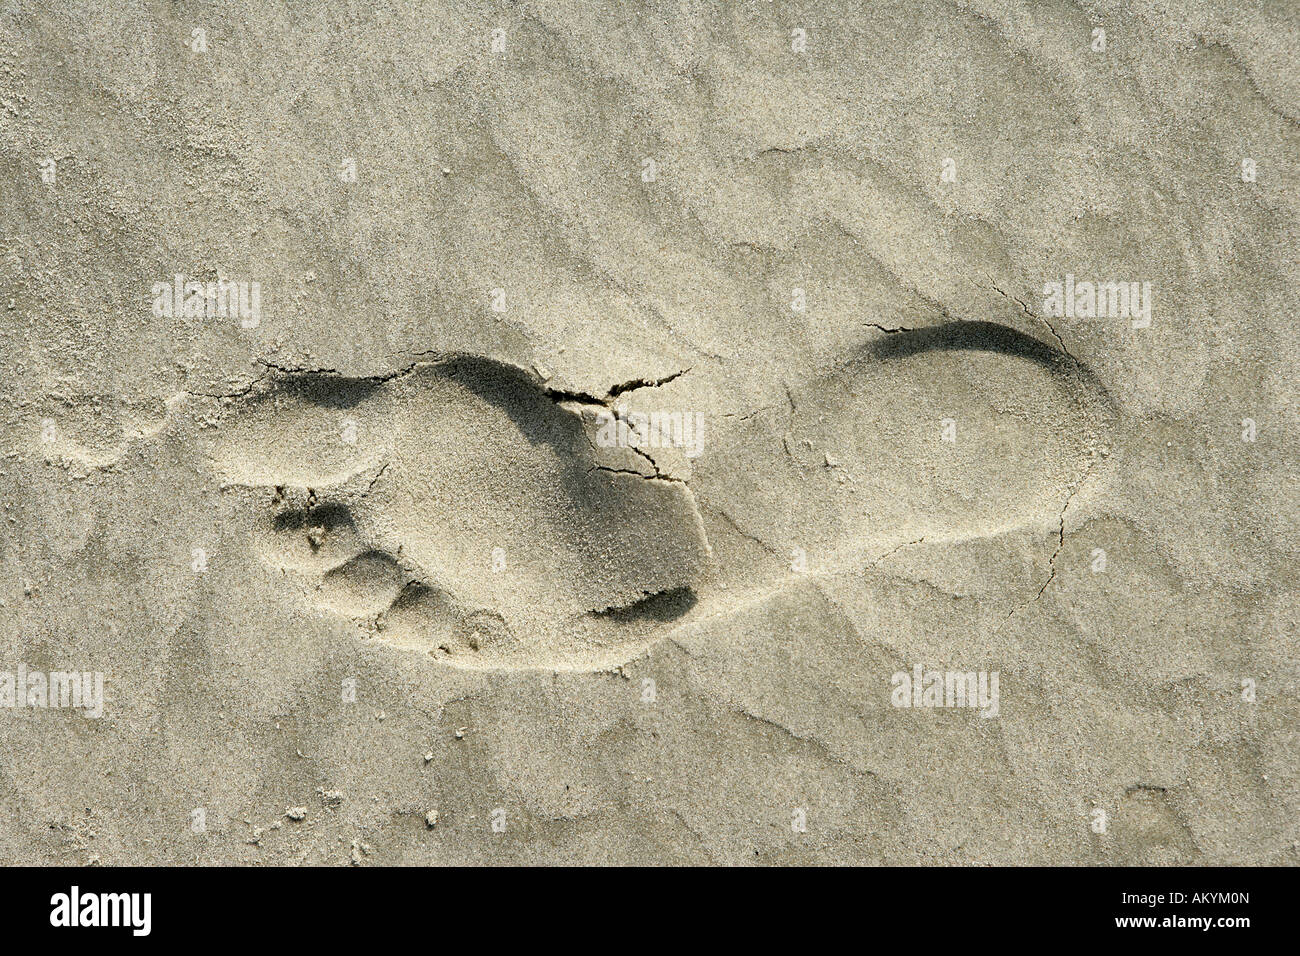 Foot print in the sand Stock Photo